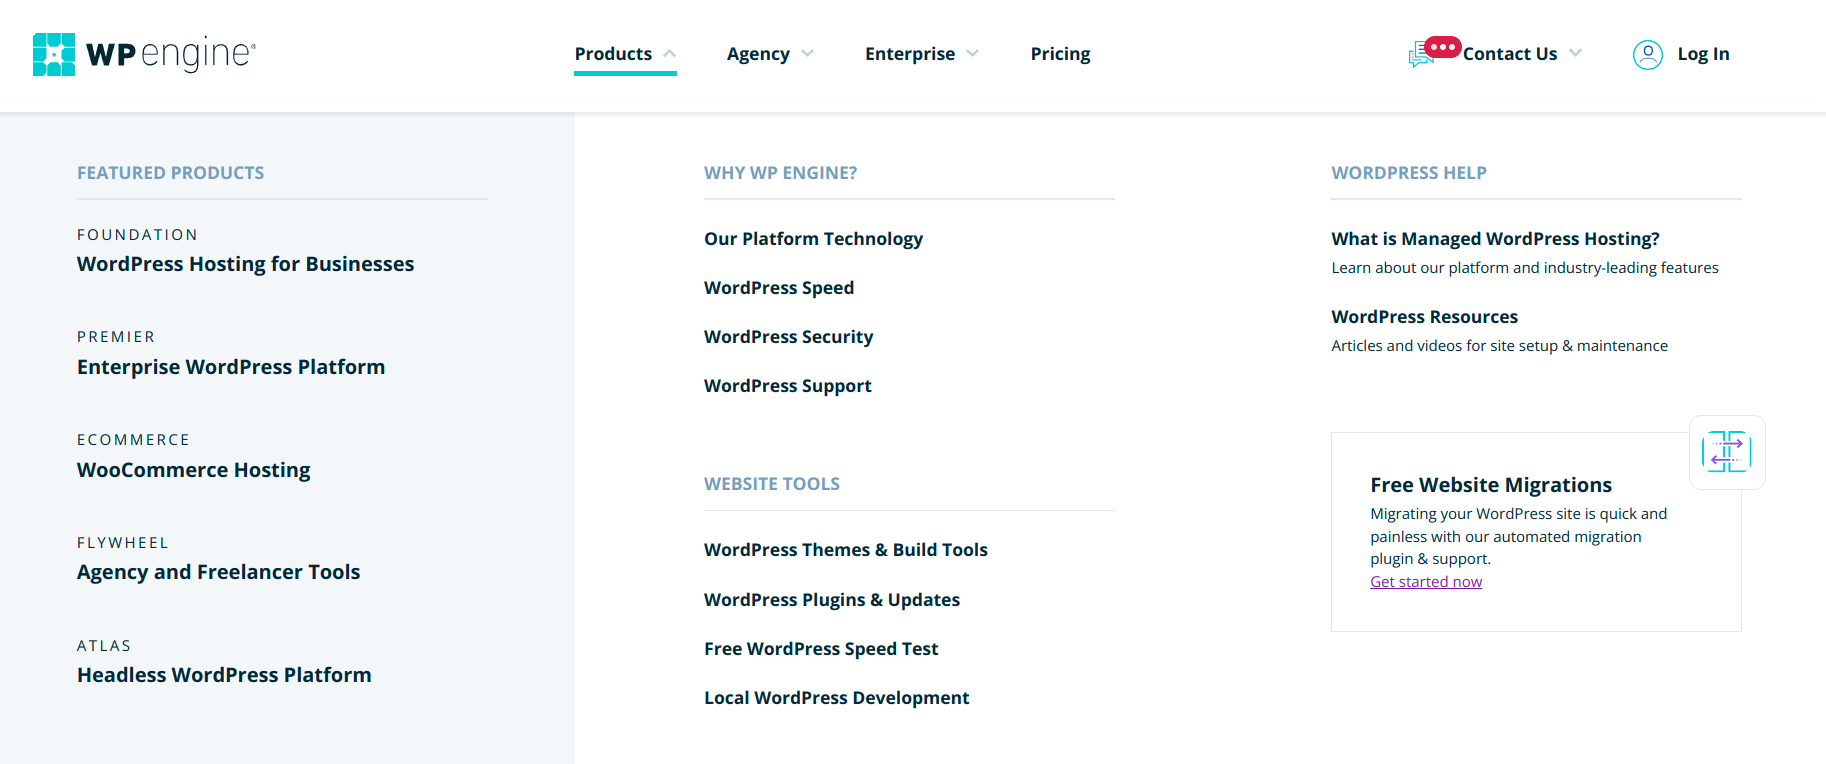 WP Engine products